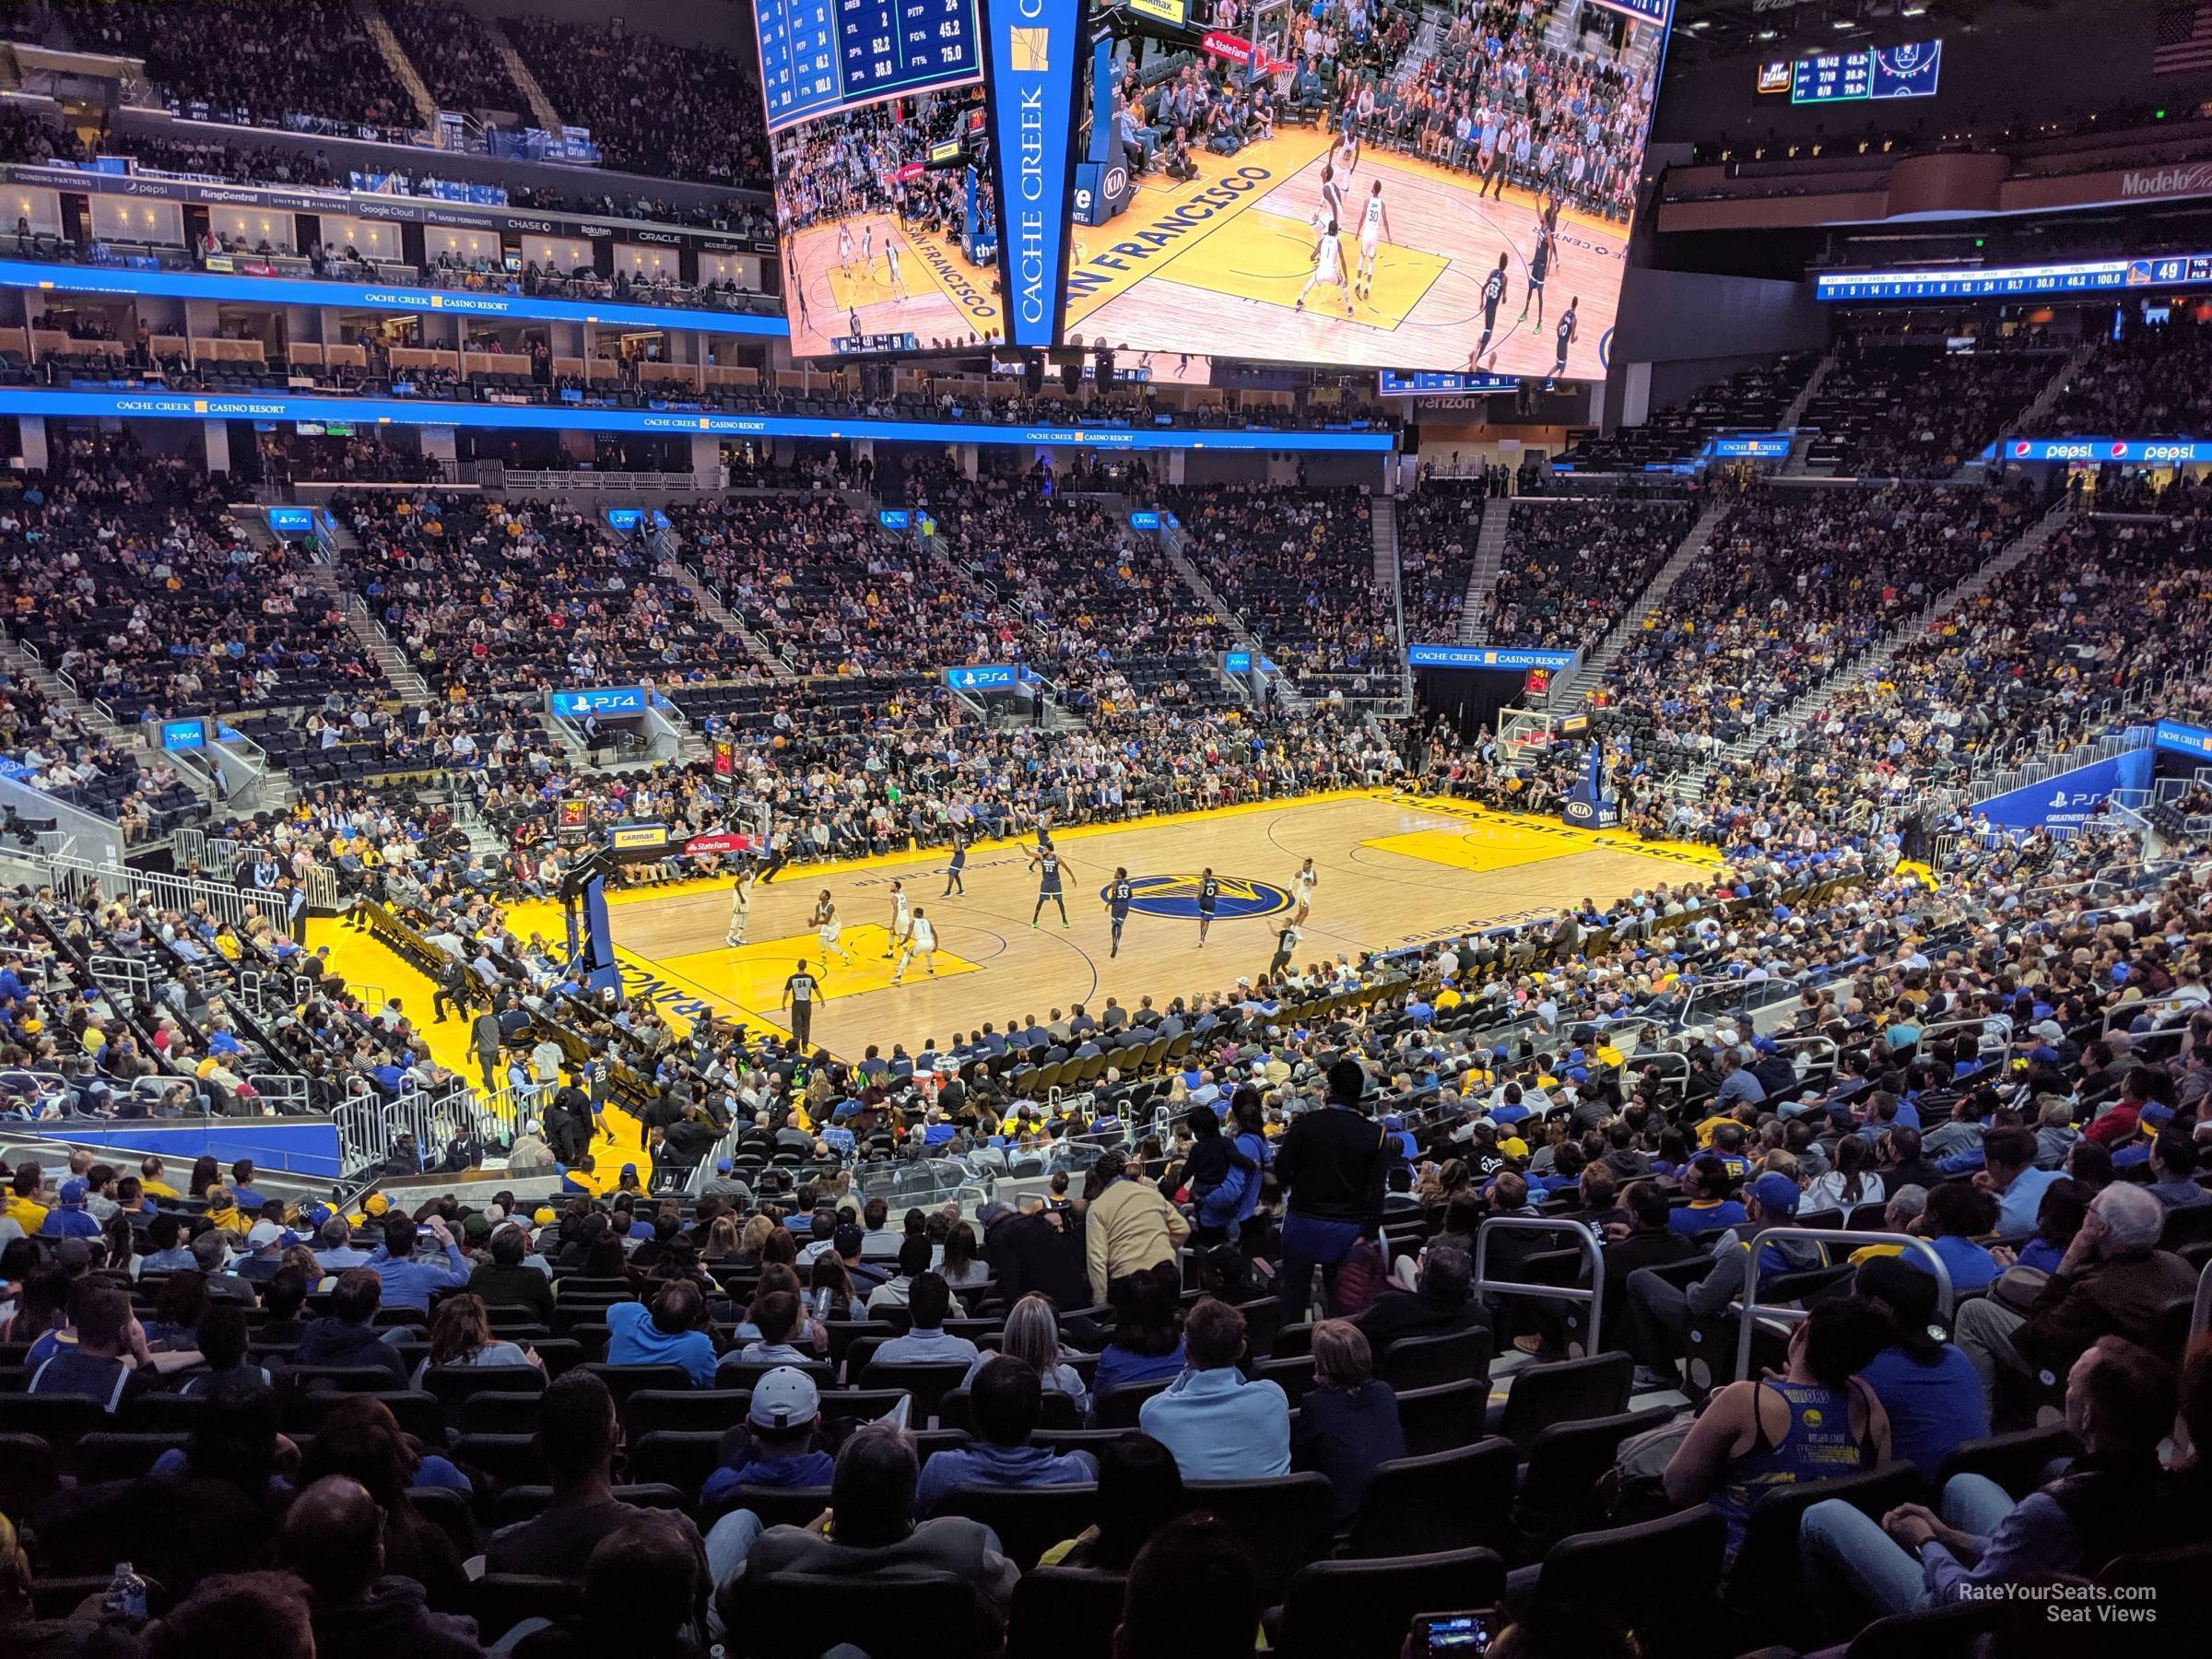 section 106, row 19 seat view  for basketball - chase center